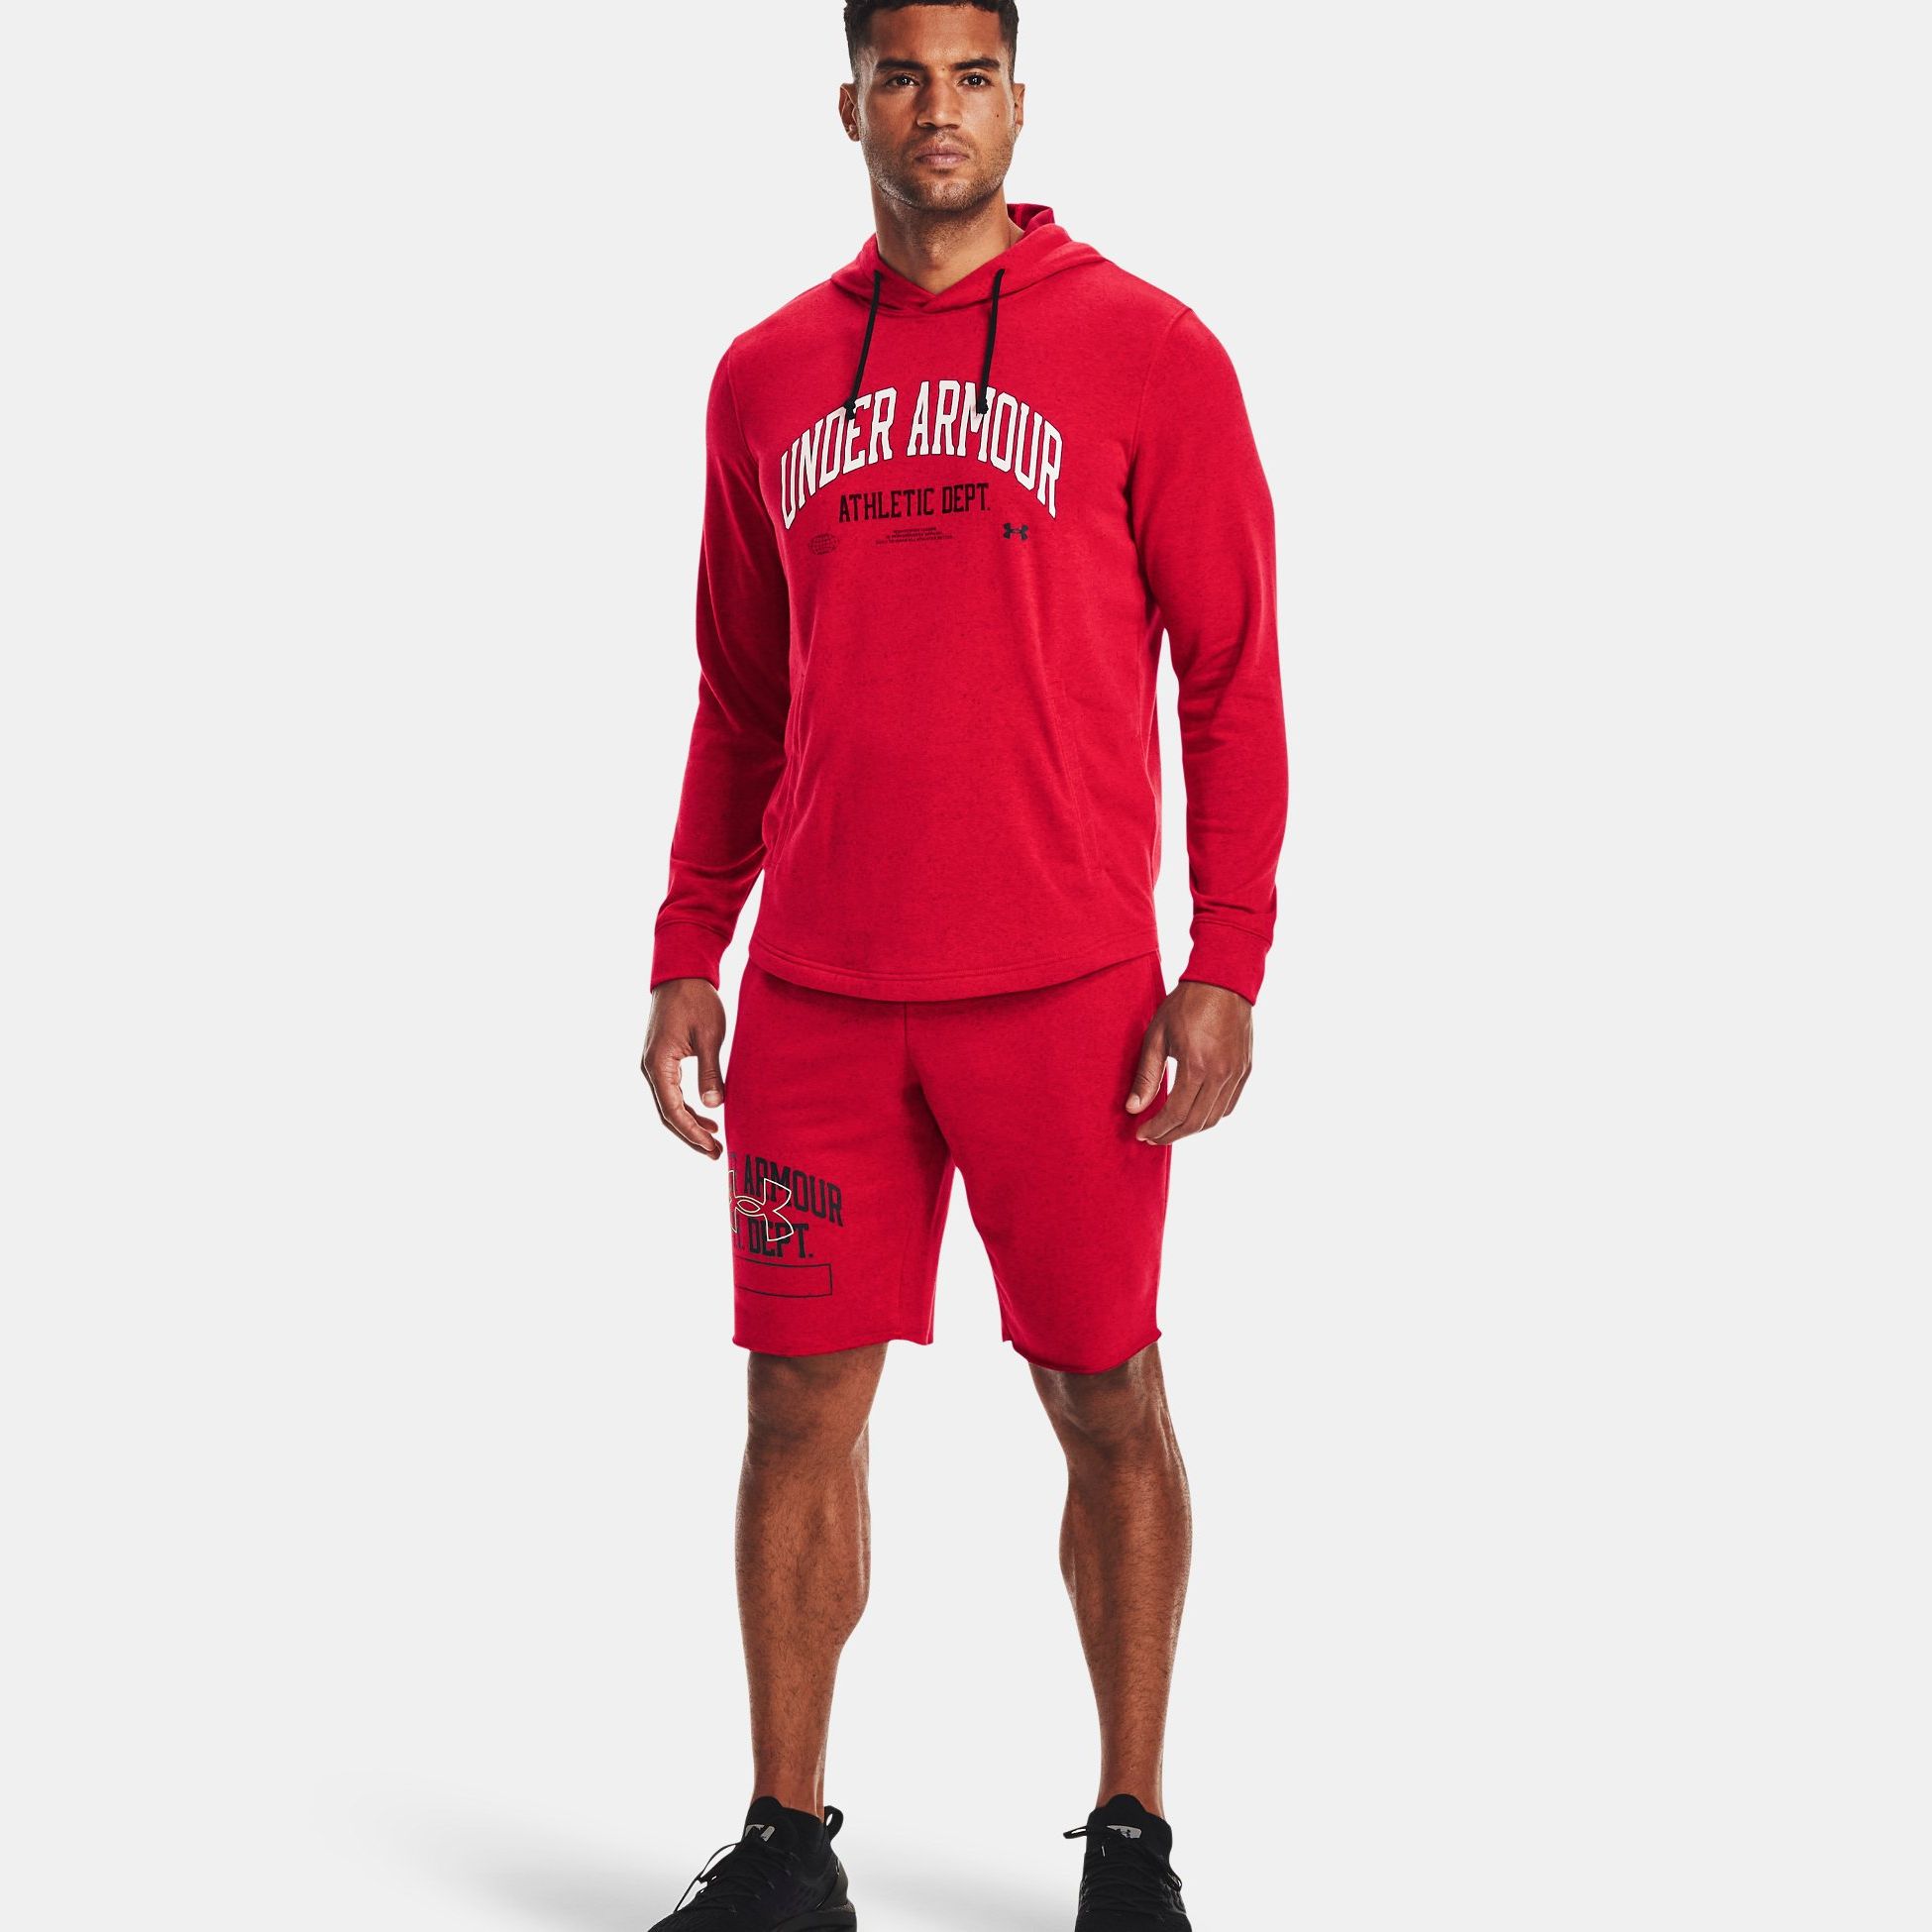 Hoodies -  under armour UA Rival Terry Athletic Department Hoodie